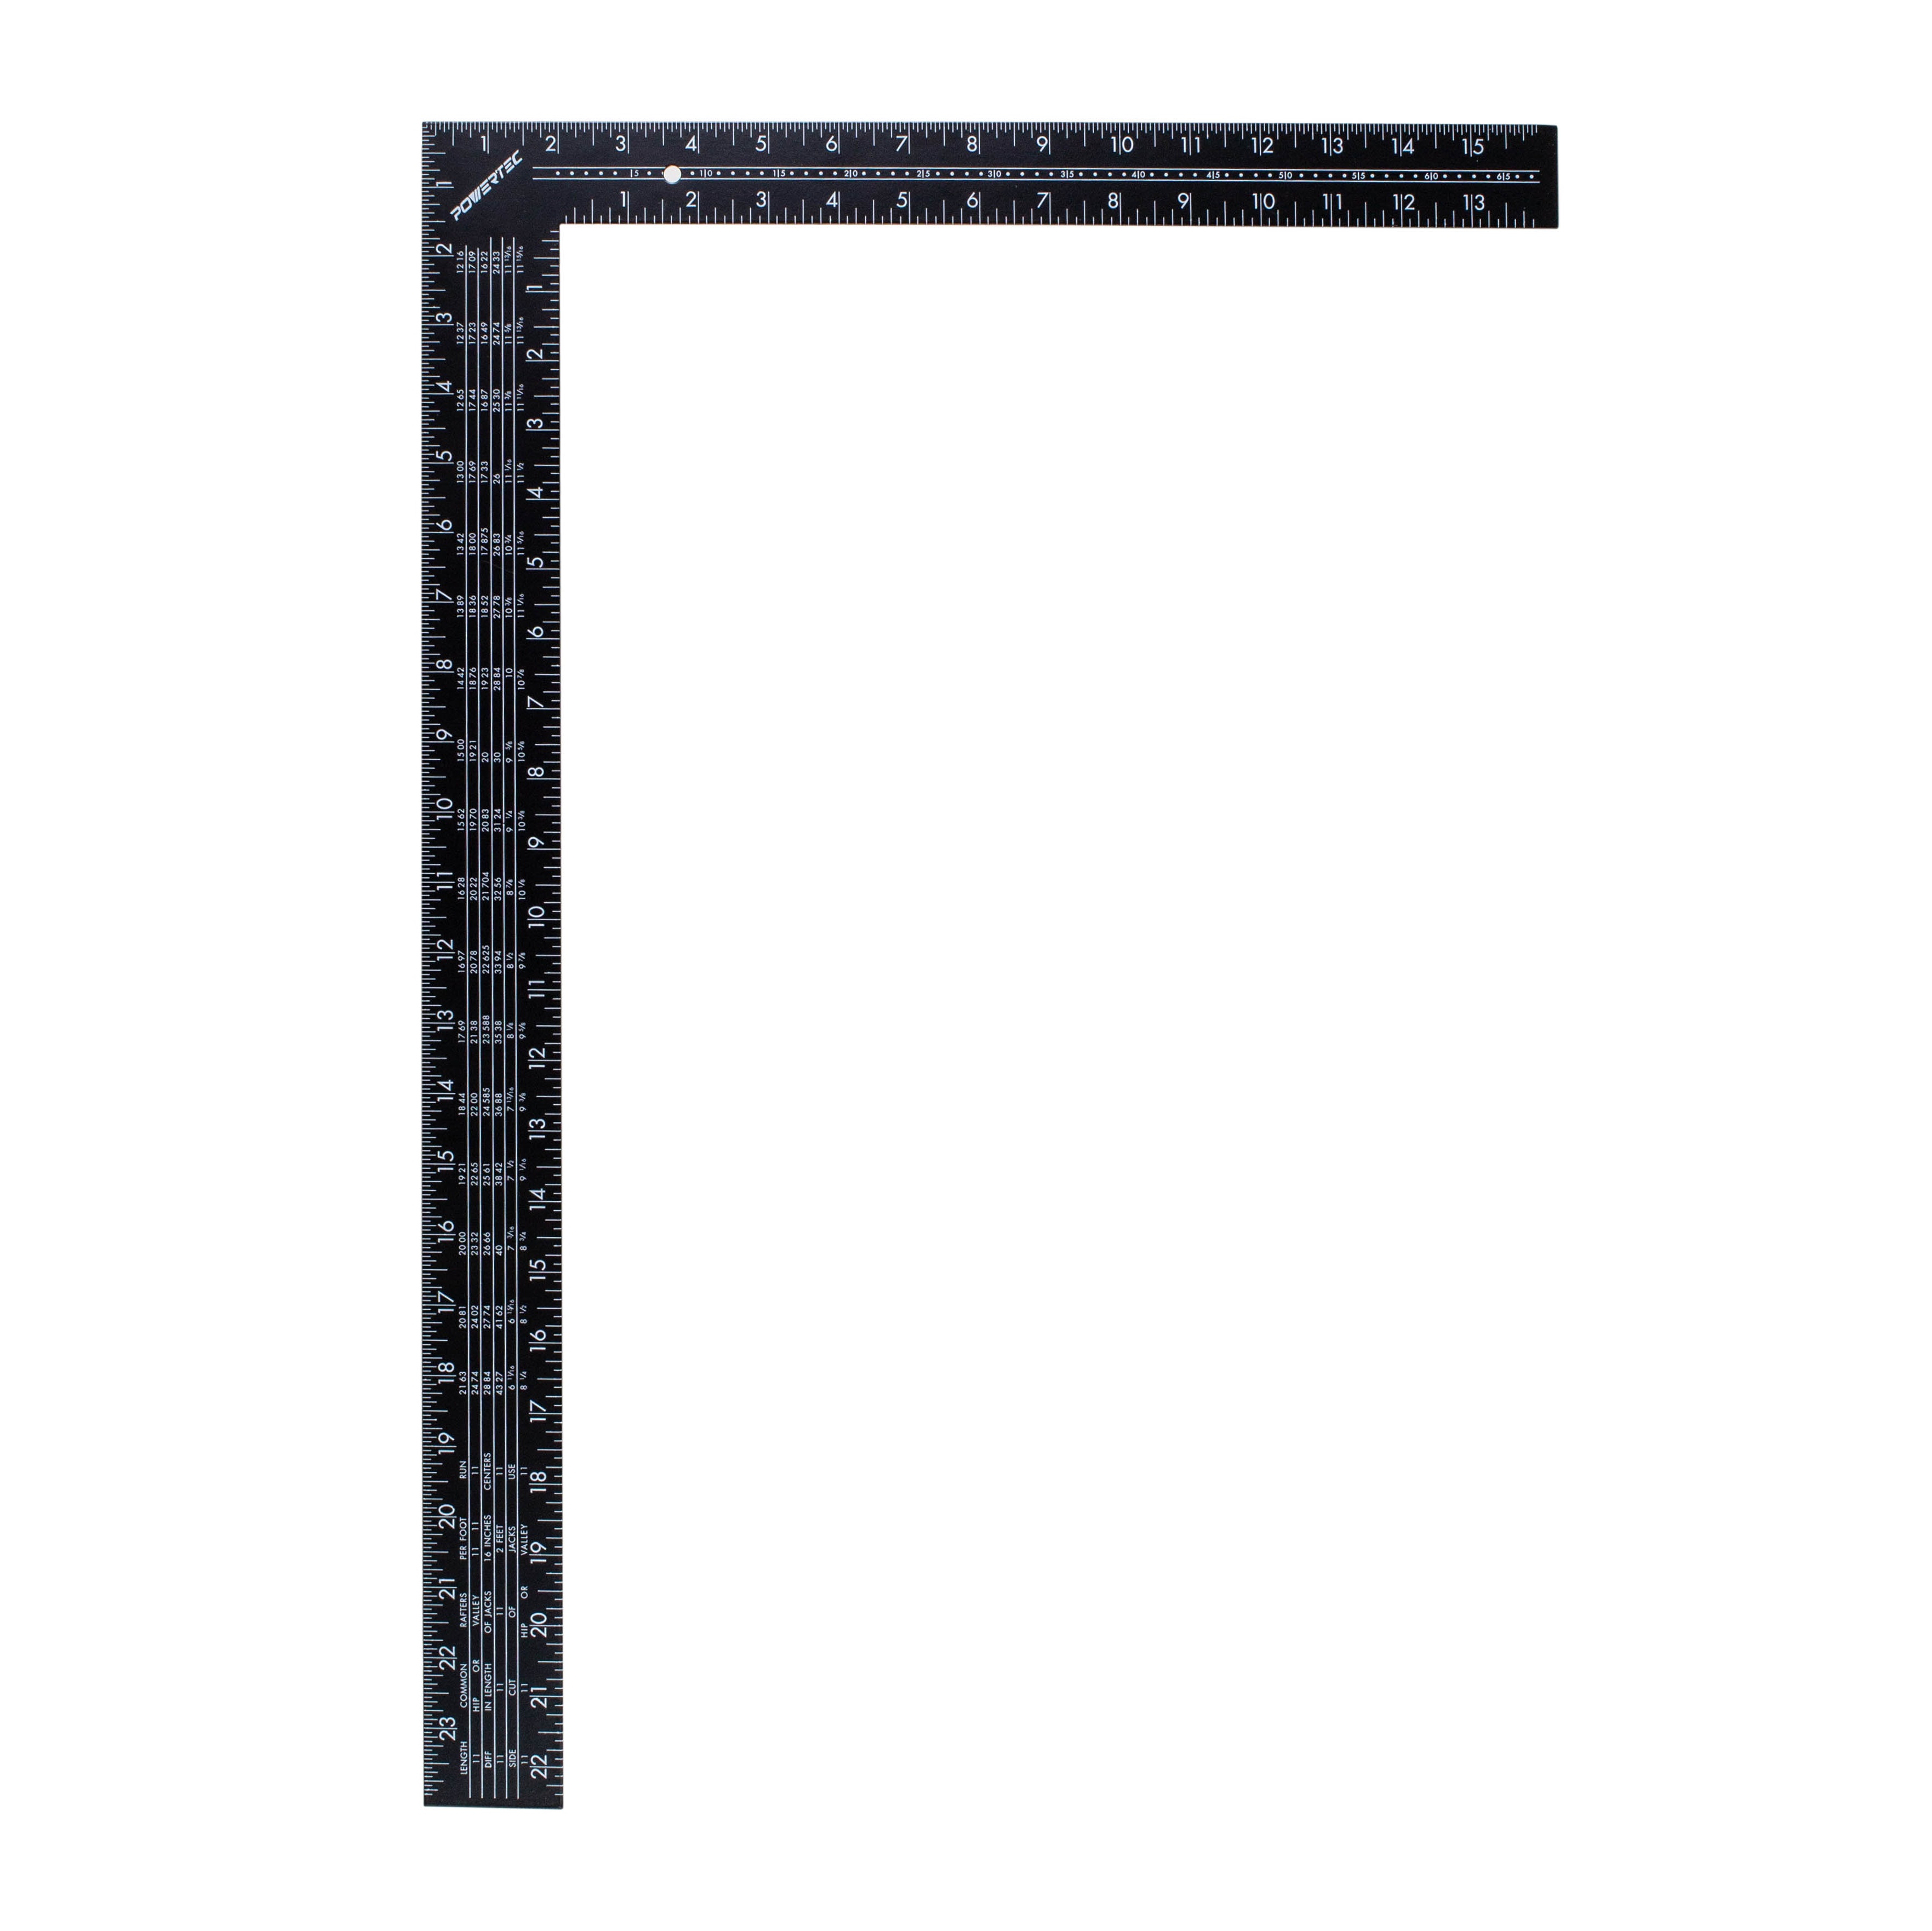 POWERTEC 80008 Steel Framing Square with Rafter Tables | 16 inch by 24 inch L Shaped Tool - Black - image 1 of 5